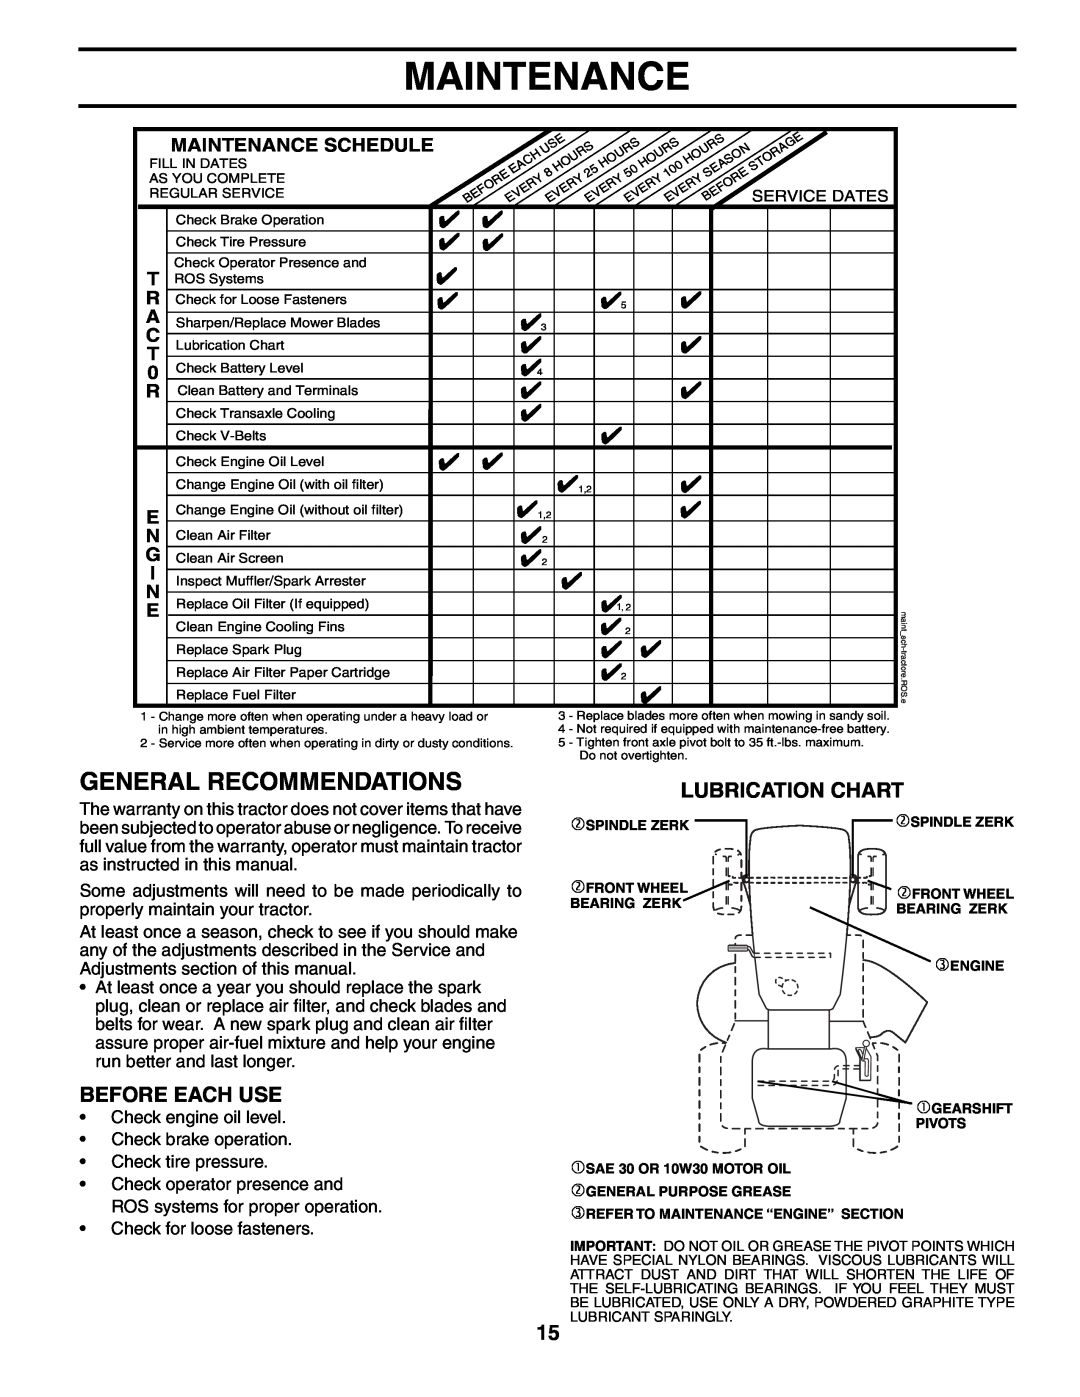 Poulan 194632 manual General Recommendations, Before Each Use, Lubrication Chart, Maintenance Schedule 